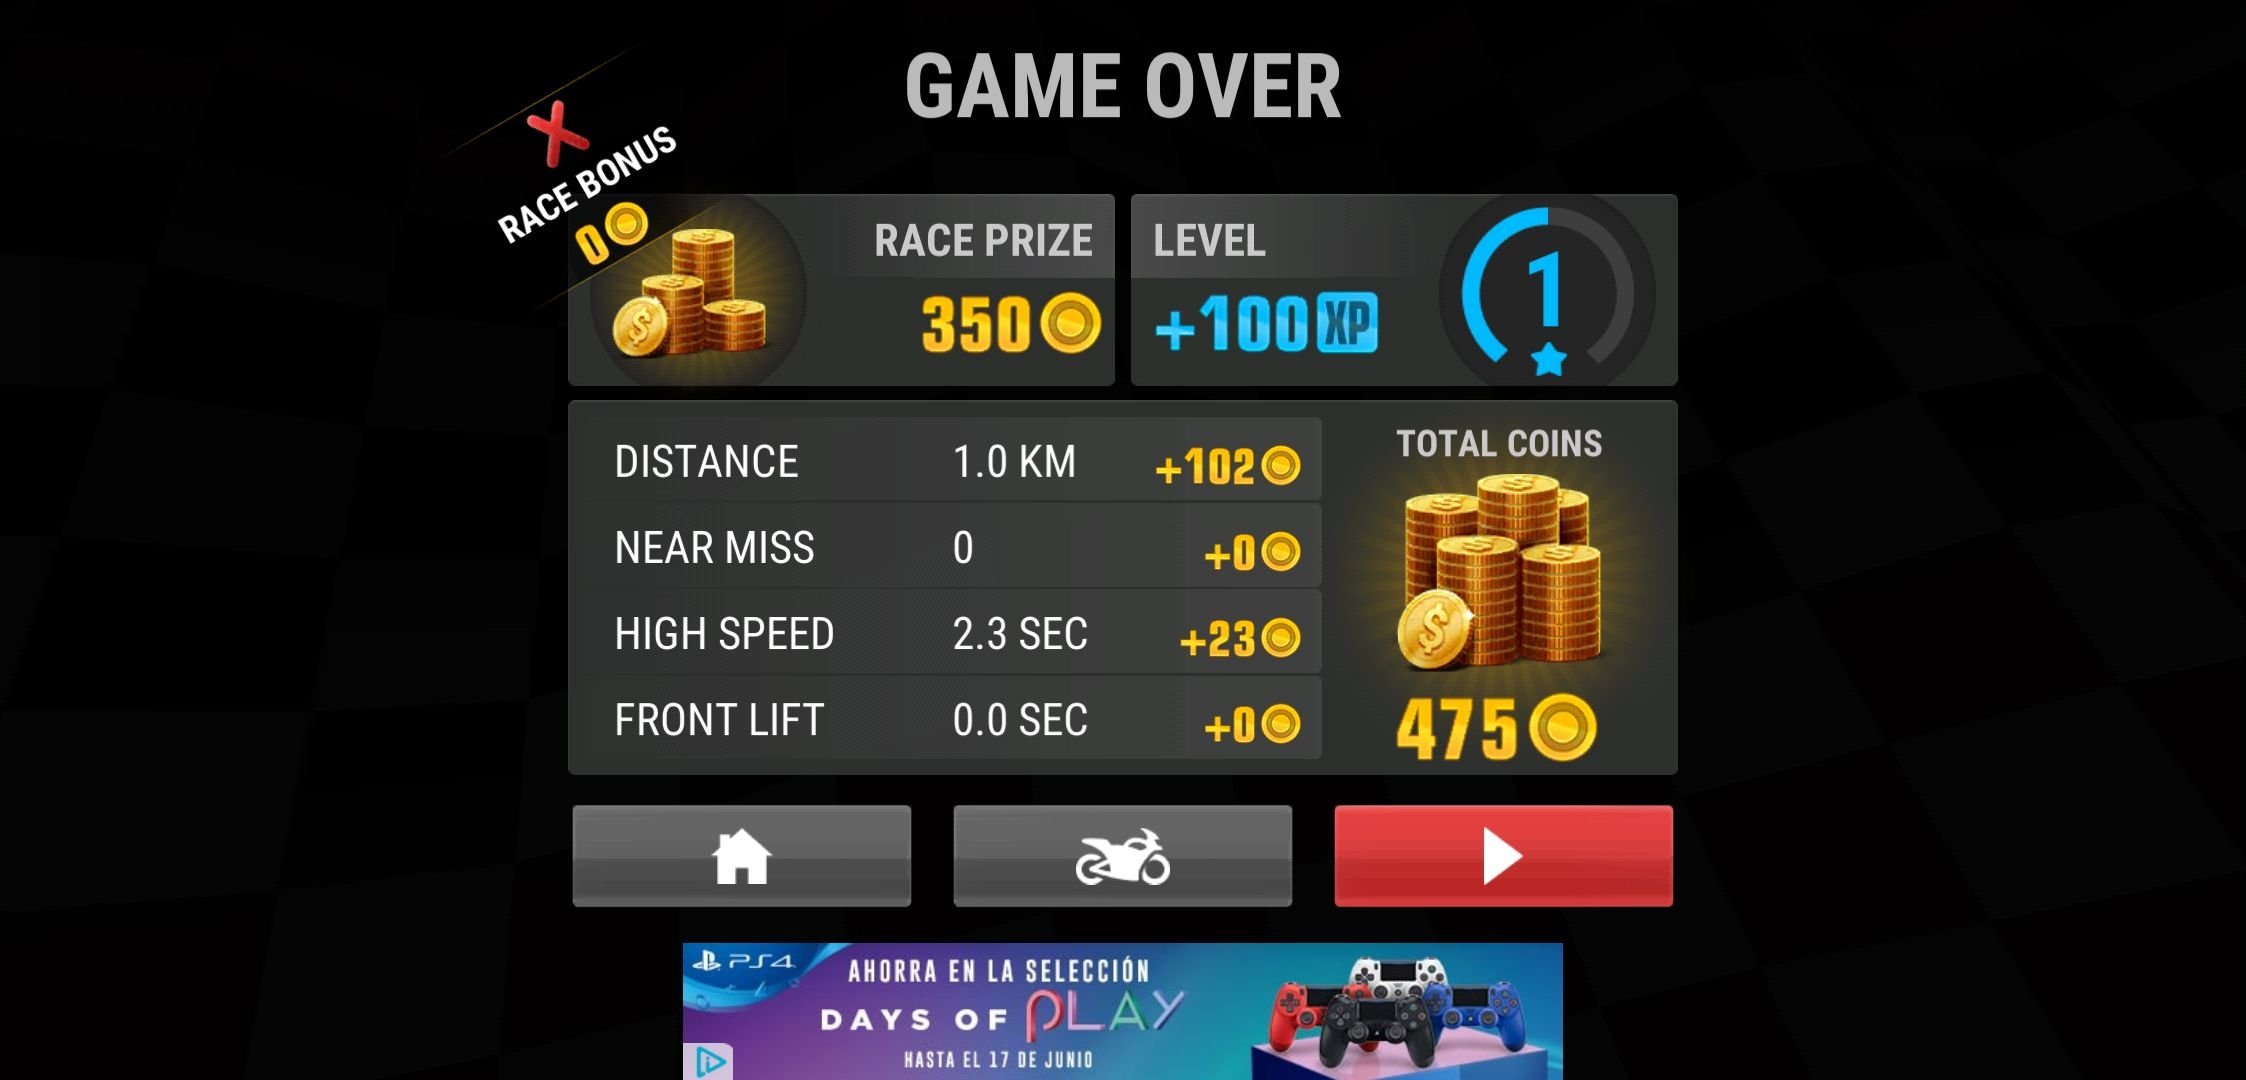 free for mac download Racing Fever : Moto